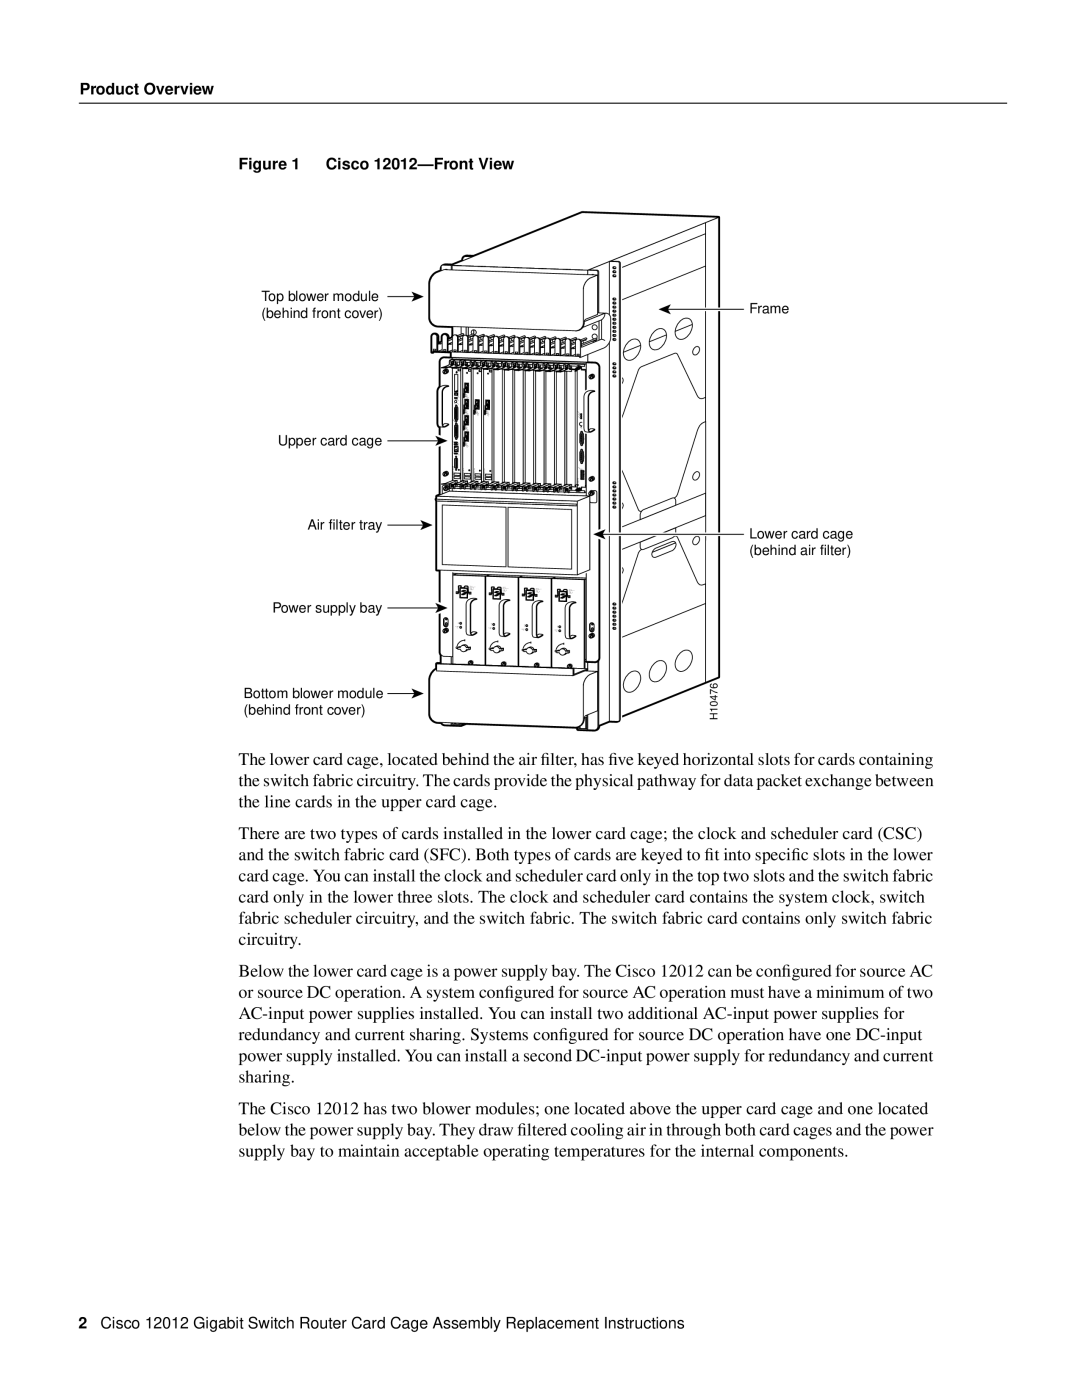 Cisco Systems manual Product Overview, Cisco 12012-Front View, Top blower module, Frame, behind front cover 